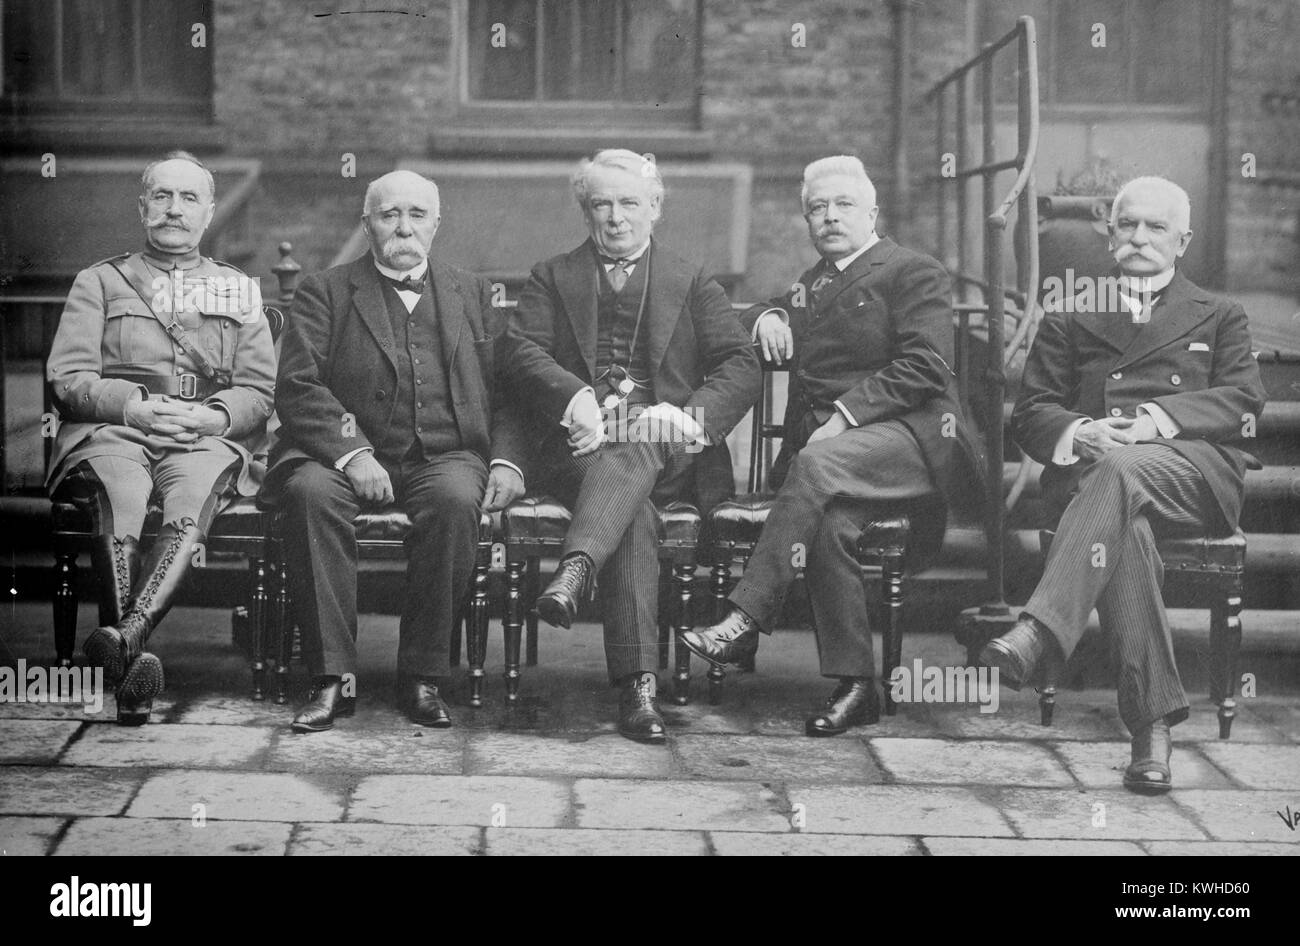 French General Ferdinand Foch (1851-1929), French Prime Minister Georges Benjamin Clemenceau (1841-1929), British Prime Minister David Lloyd George (1863-1945), Italian Prime Minister Vittorio Emanuele Orlando (1860-1952) and Italian Minister of Foreign Affairs Baron Sidney Costantino Sonnino (1847-1922) Stock Photo